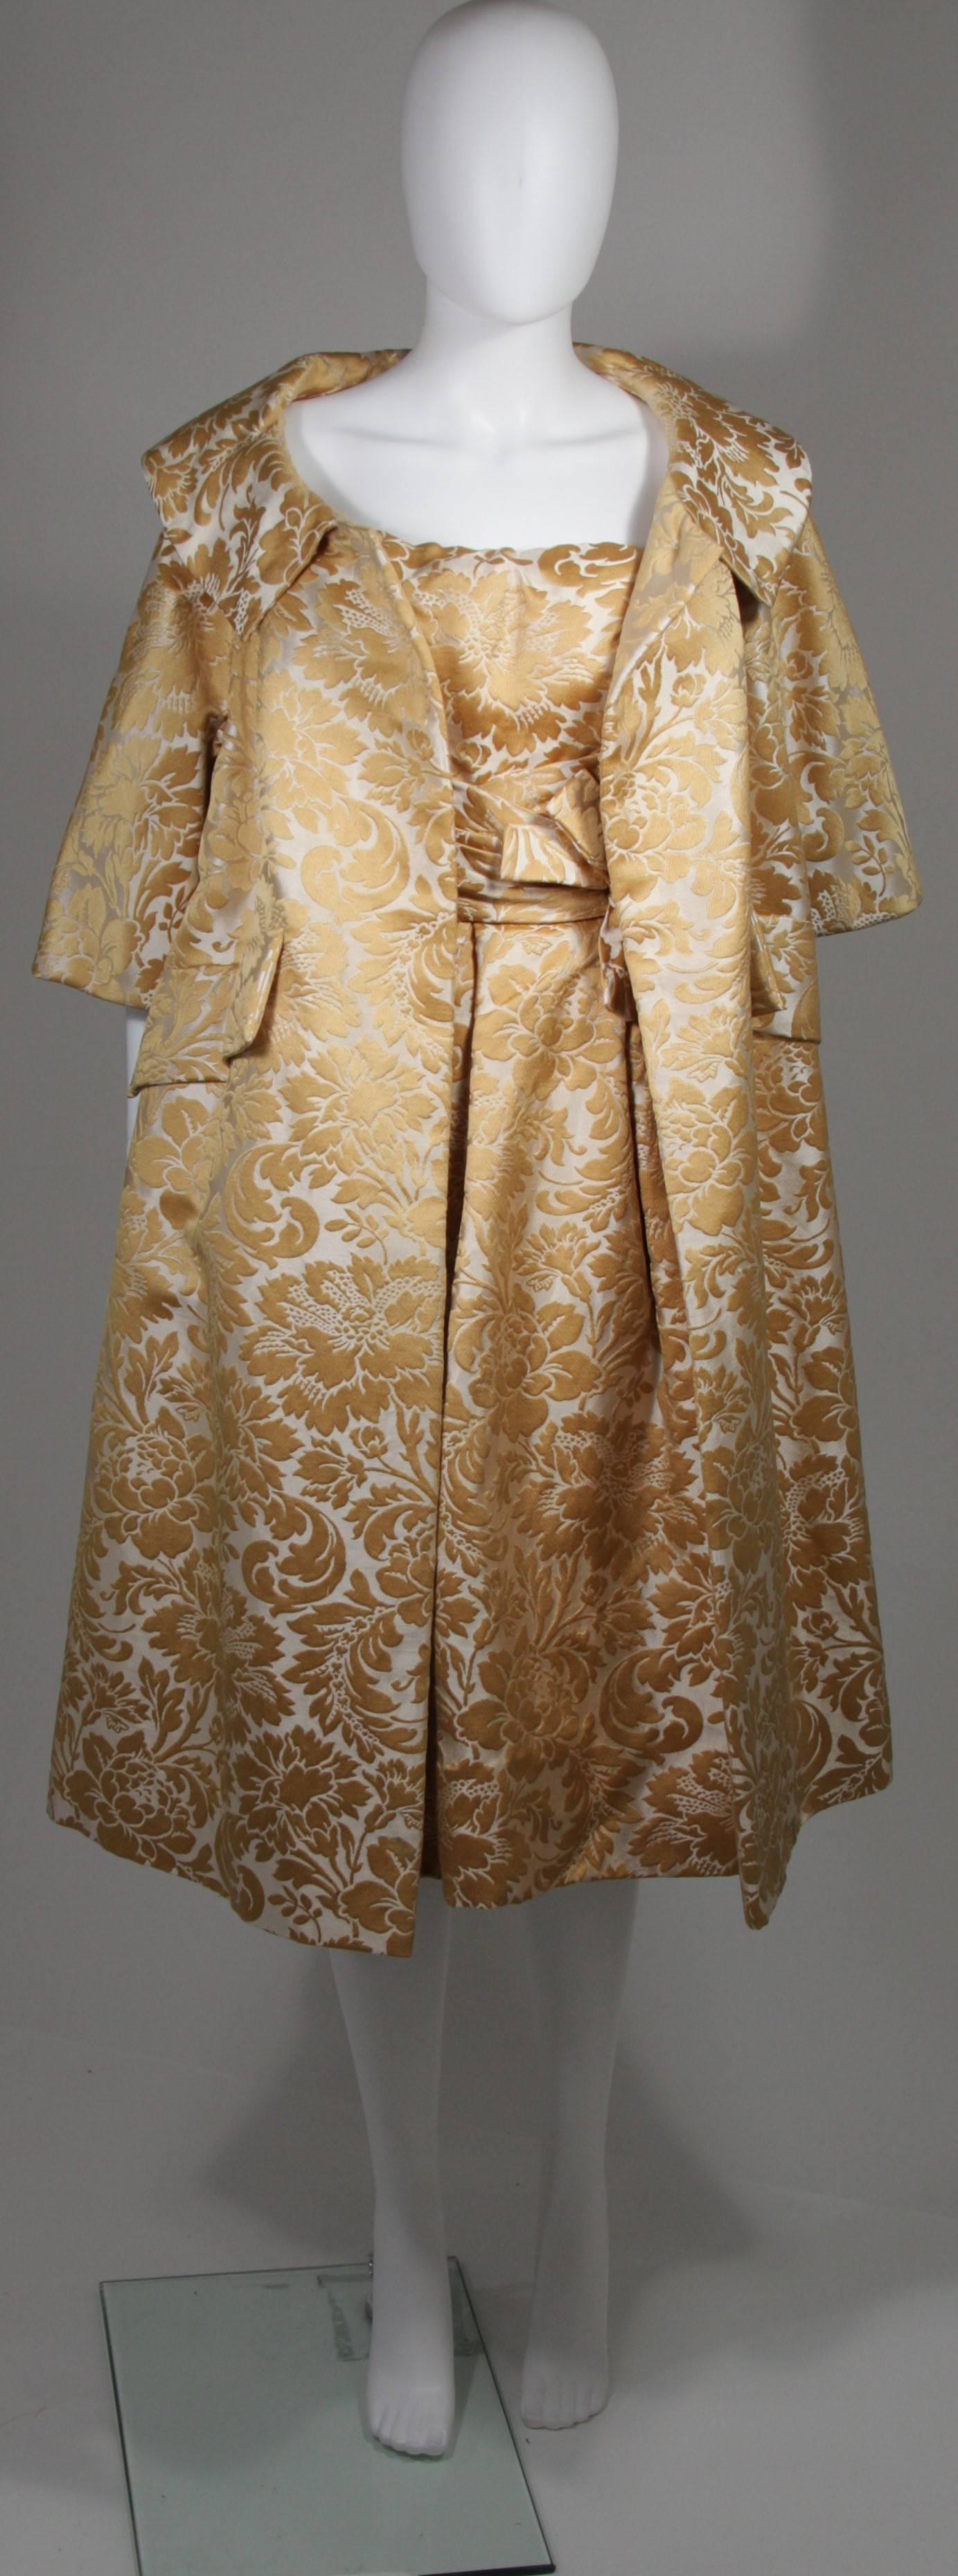 This Samuel Winston evening ensemble is composed of a gold and cream brocade. The dress features a draped style at the waist which culminates to a bow. There is a zipper closure. The large opera coat features a button closure with hook and eye. In